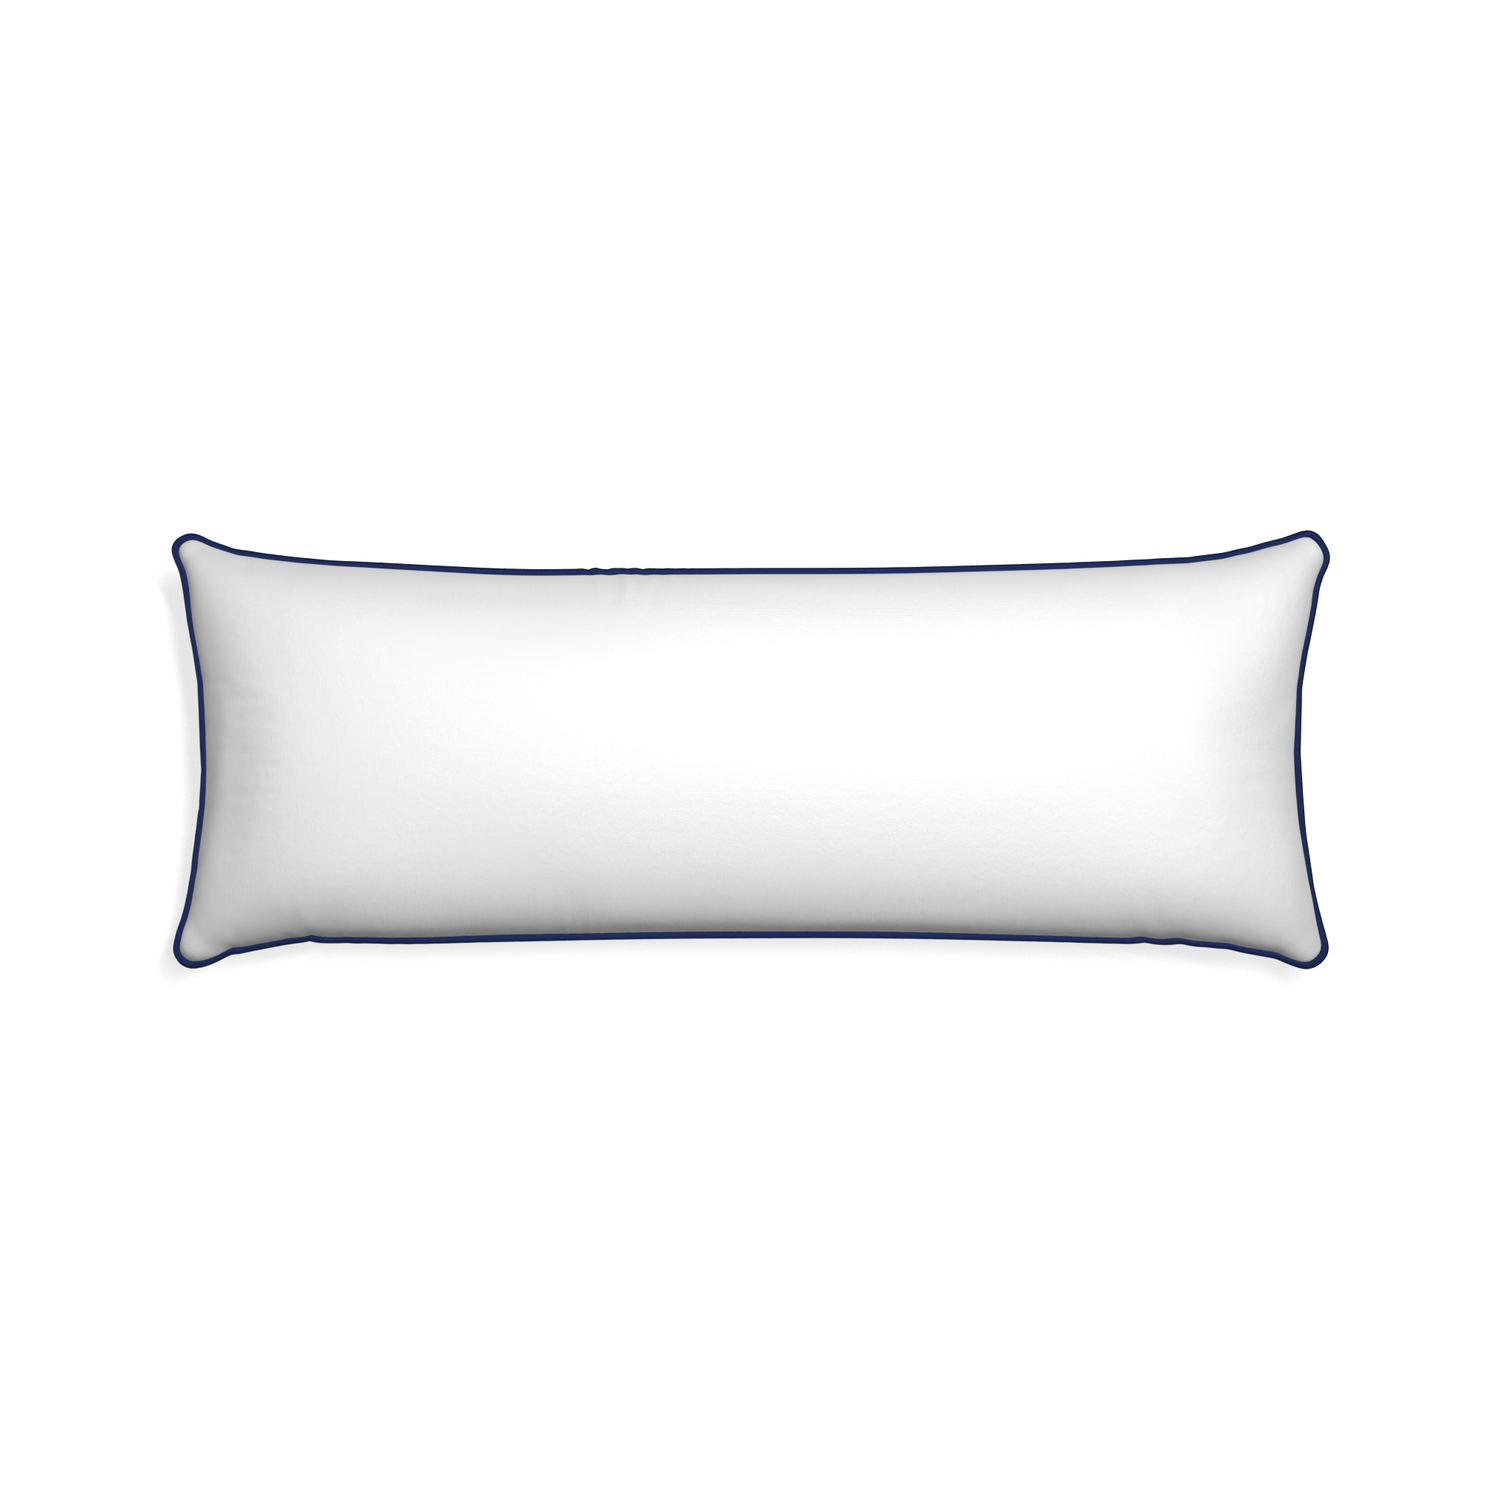 Xl-lumbar snow custom white cottonpillow with midnight piping on white background